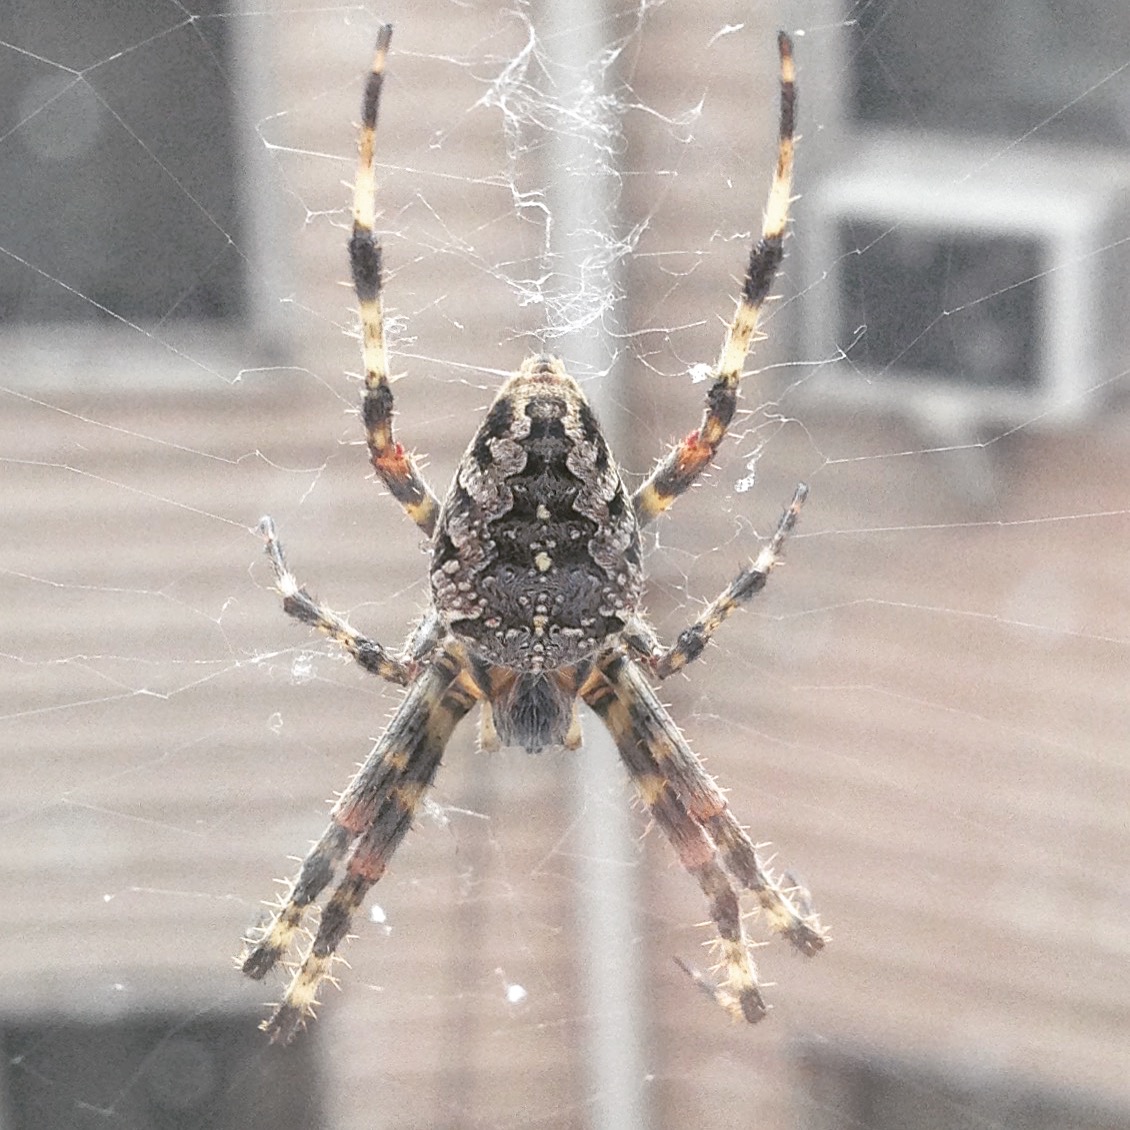 The Spider Who Stayed Out In The Cold Backyard And Beyond